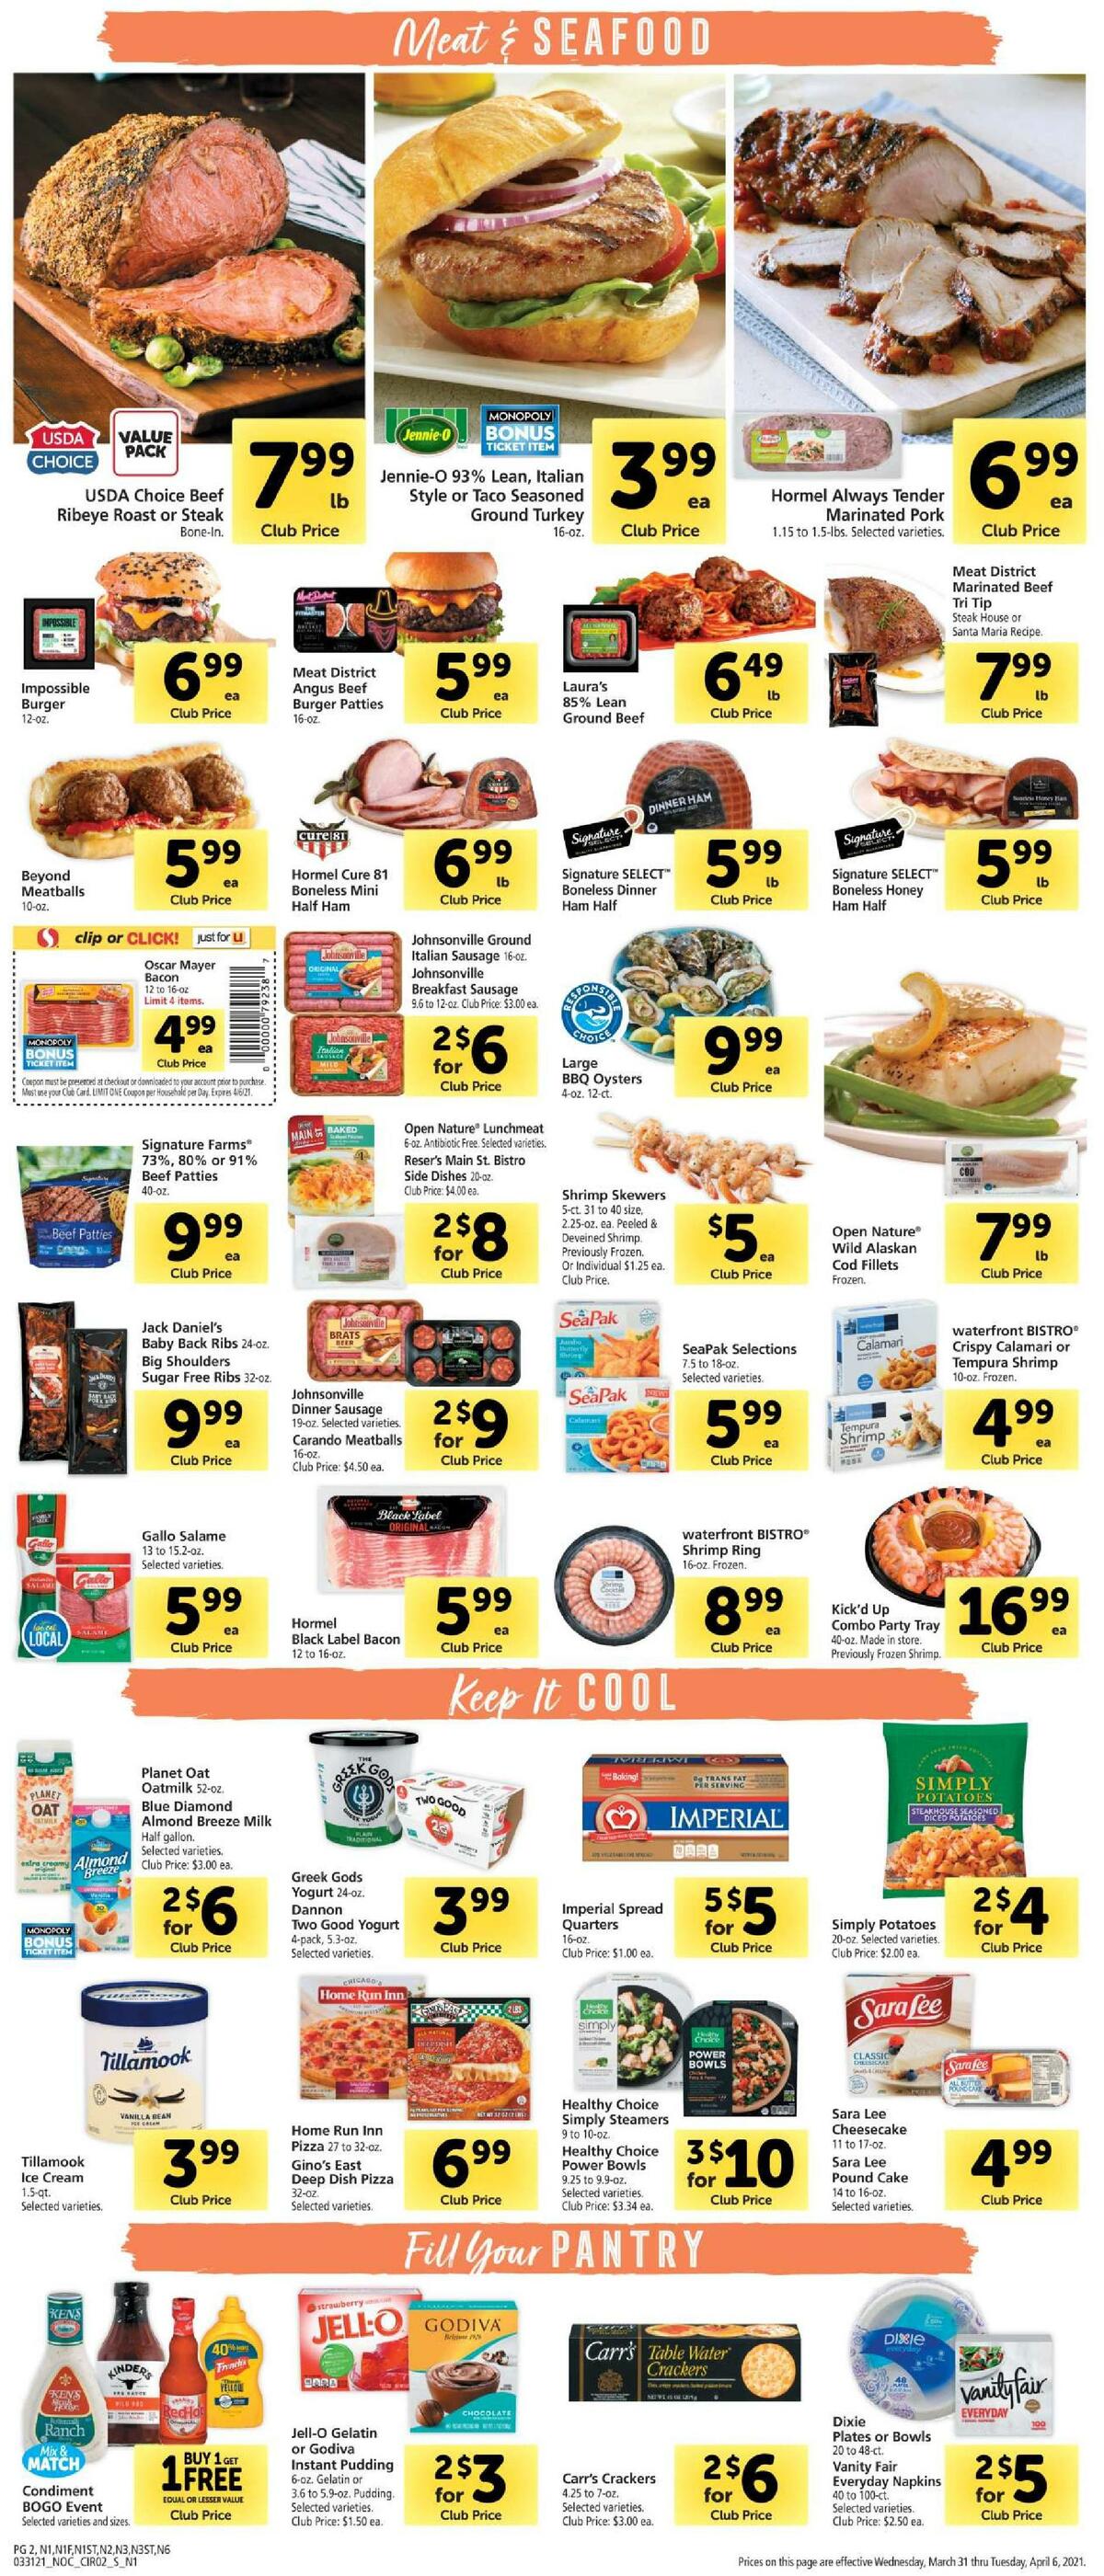 Safeway Weekly Ad from March 31